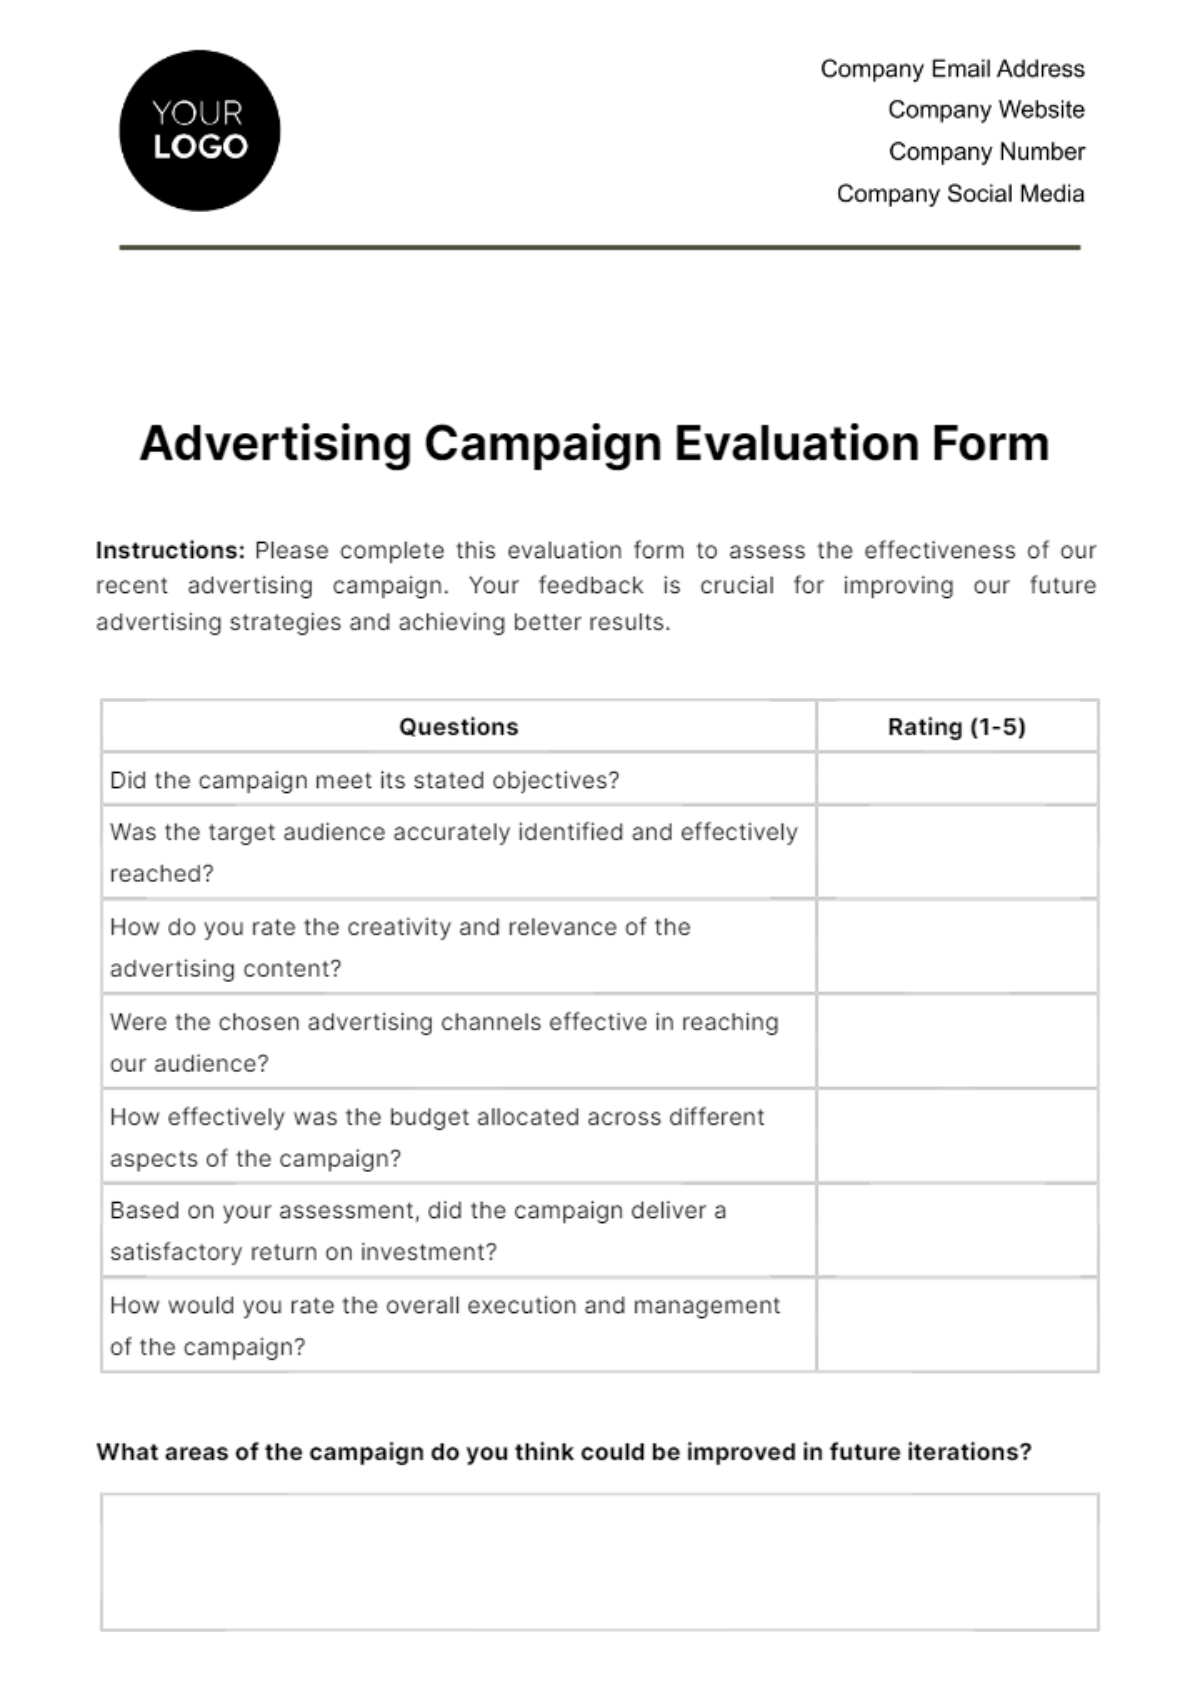 Free Advertising Campaign Evaluation Form  Template